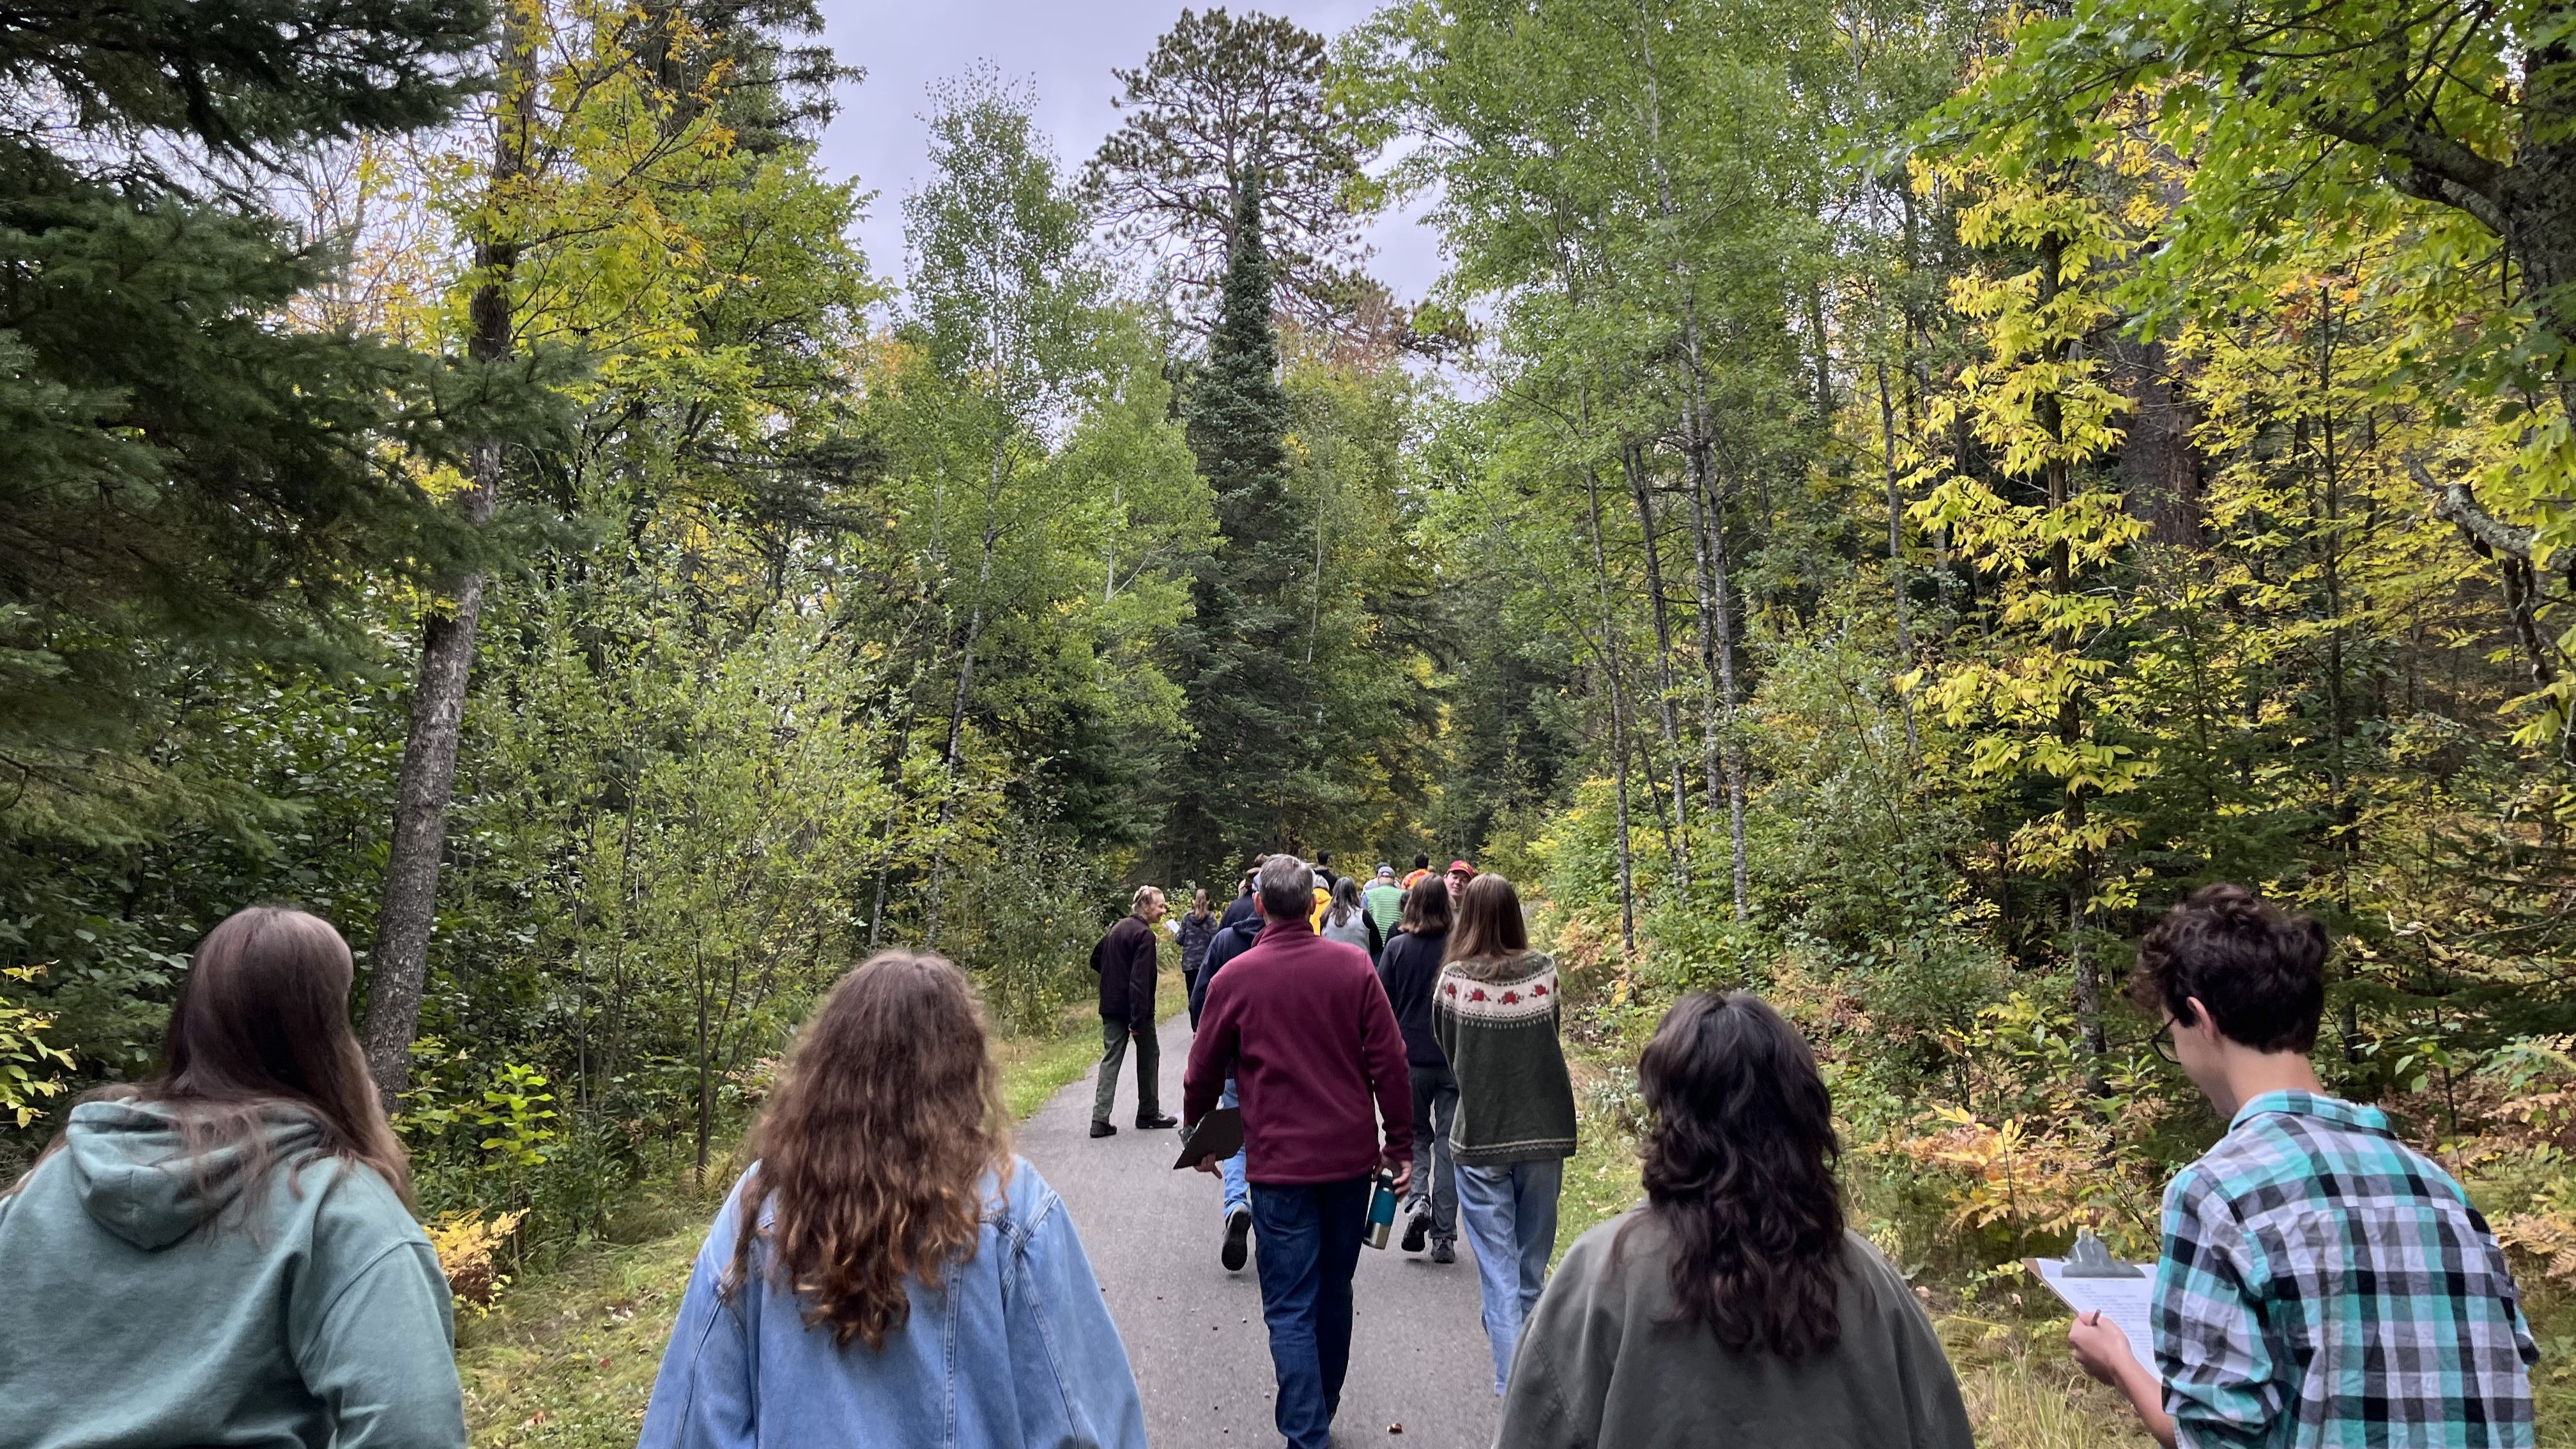 People walking on a trail in Itasca State Park, surrounded by trees